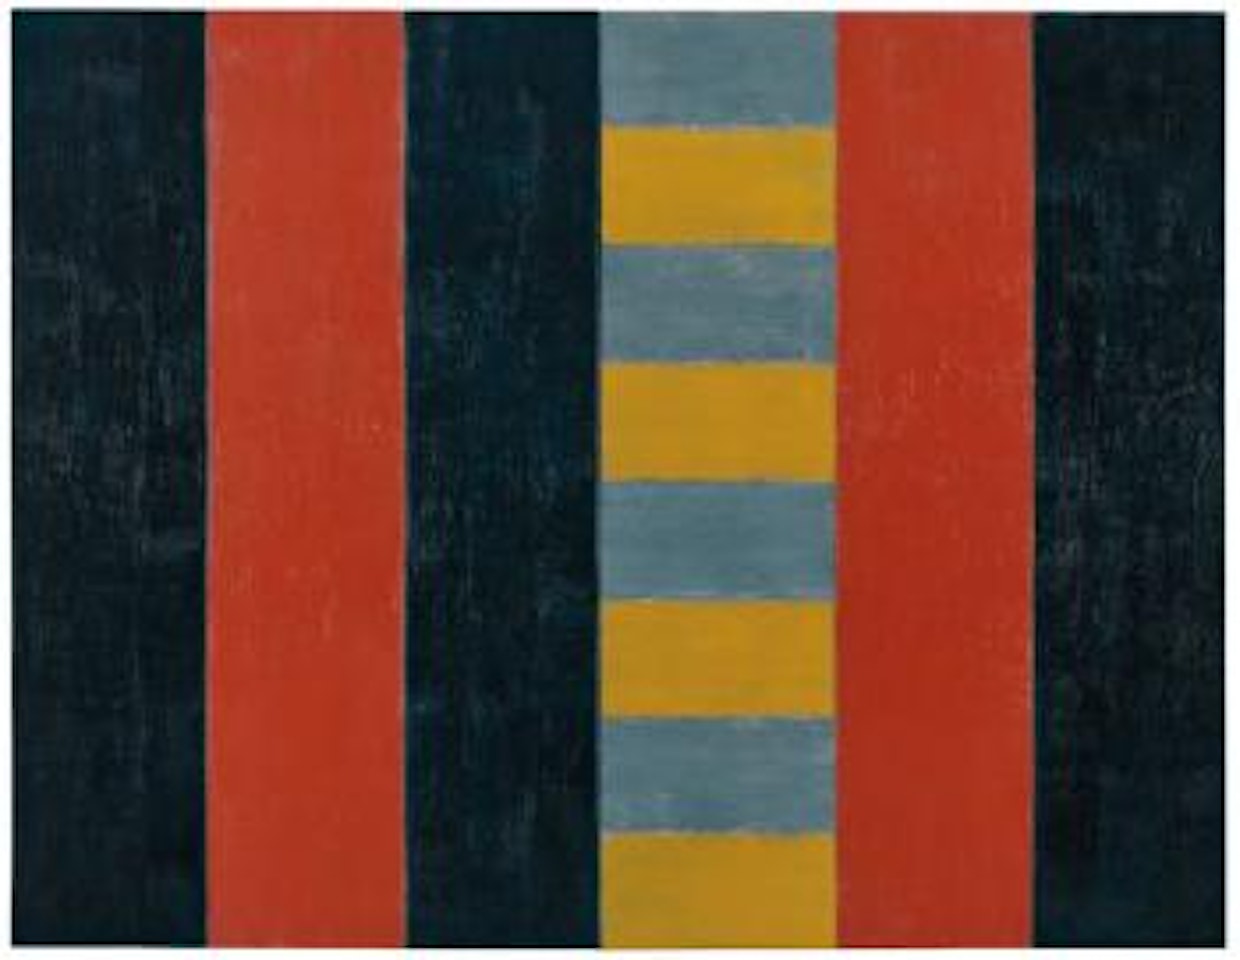 Stranger by Sean Scully